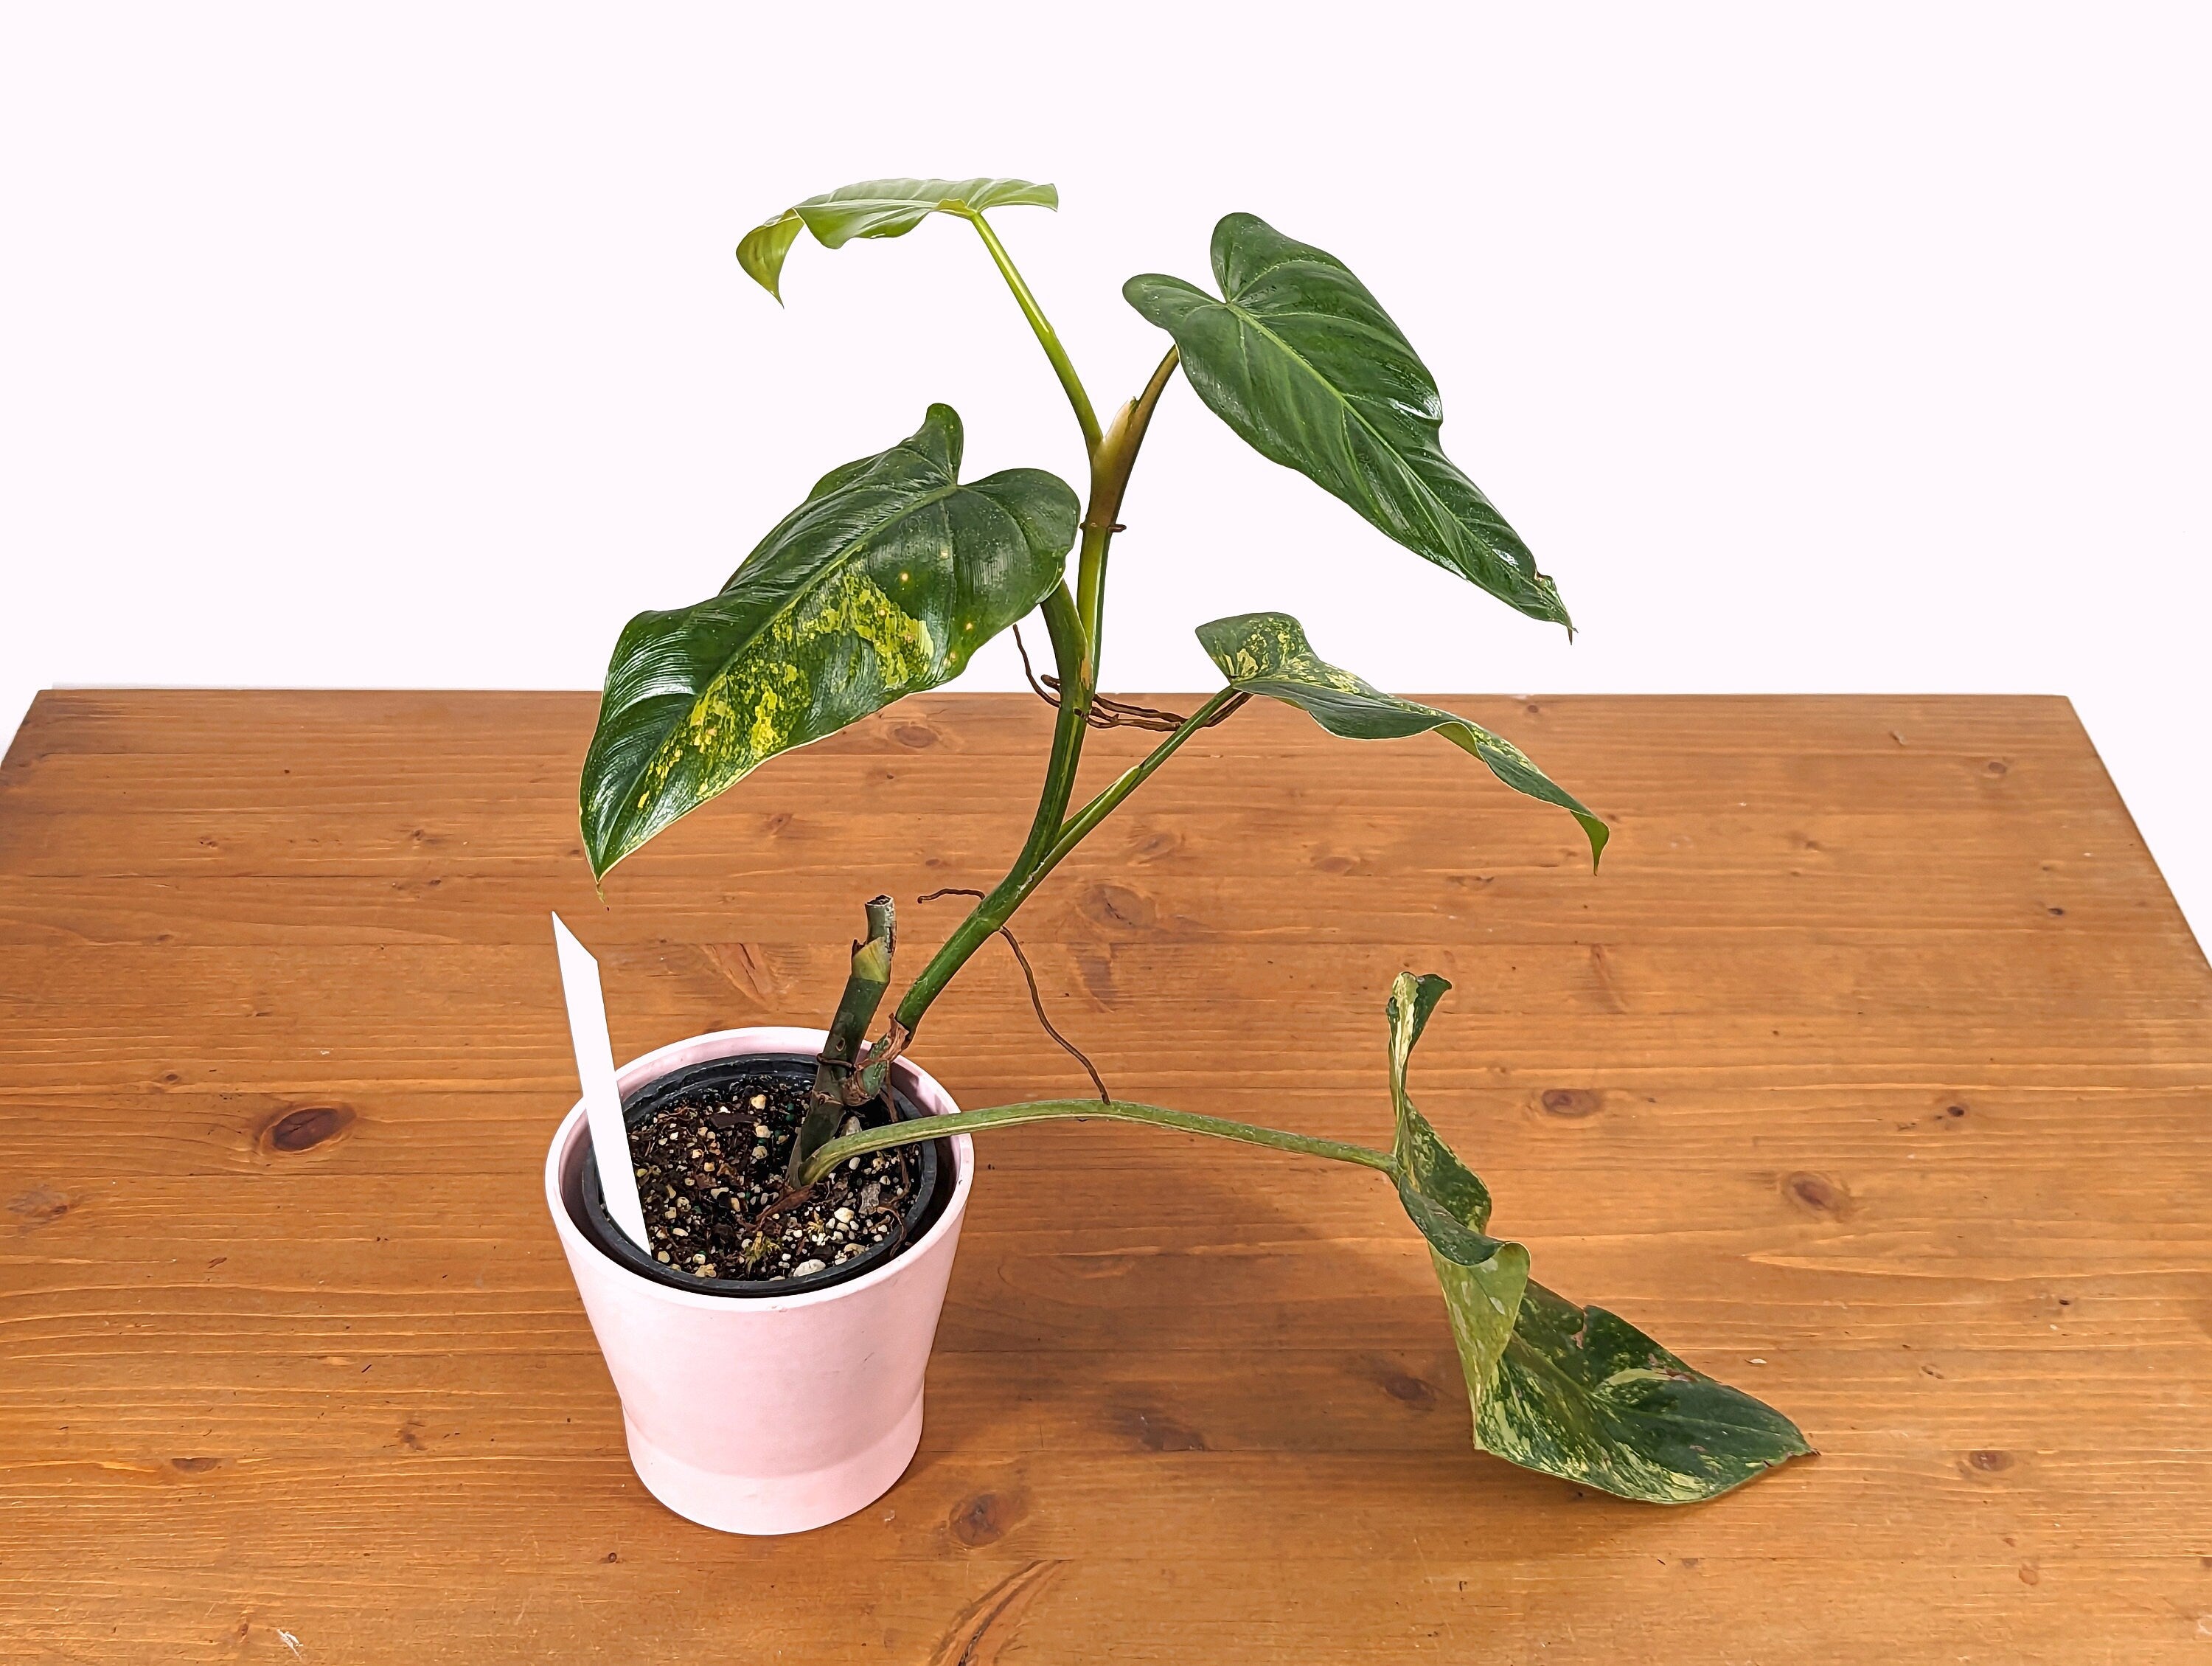 Philodendron Domesticum Variegated Exact Plant Pictured 4 inch pot 